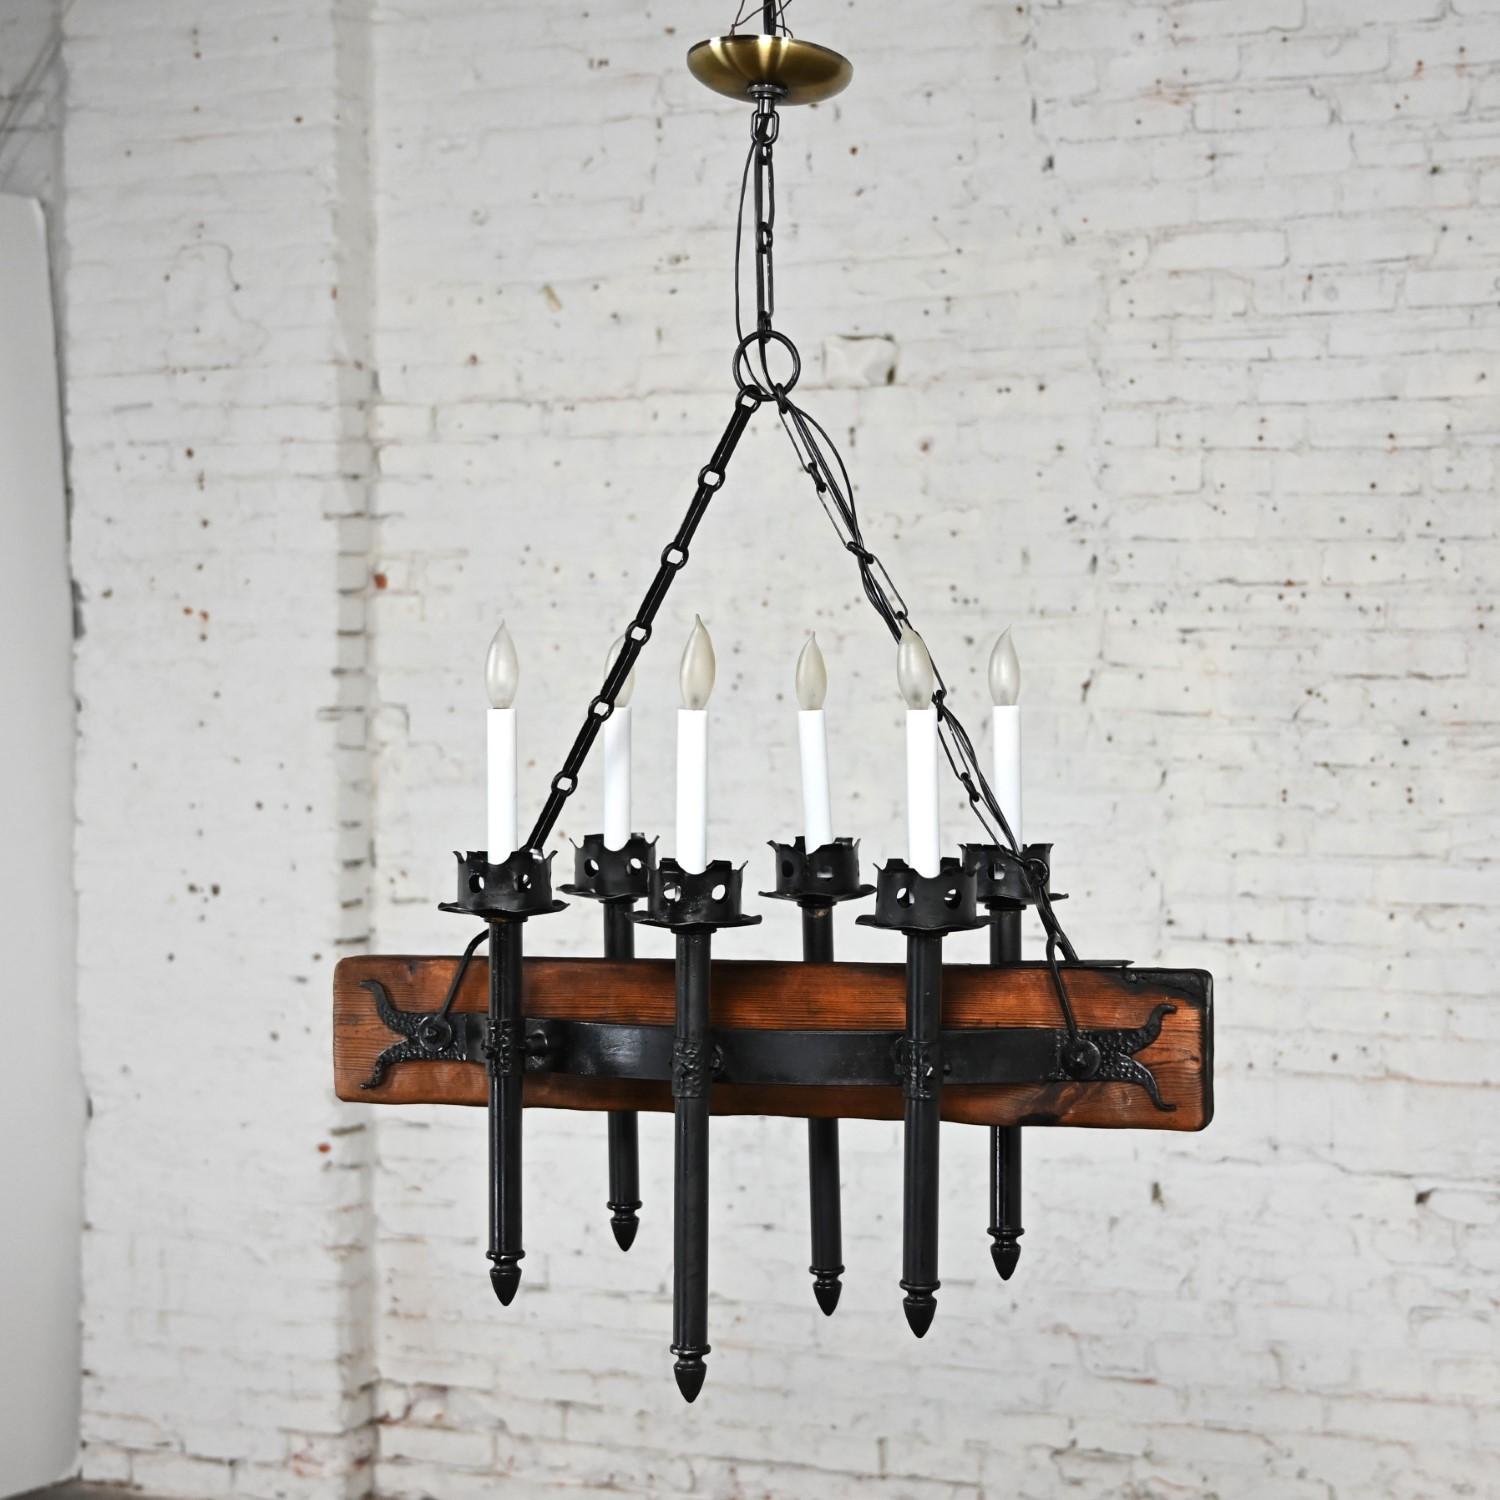 Awesome vintage Medieval Gothic or Spanish Revival iron & wood beam hanging light fixture with black iron chain, hammered iron details, candle posts, and a round brass canopy marked made in Mexico. Beautiful condition, keeping in mind that this is